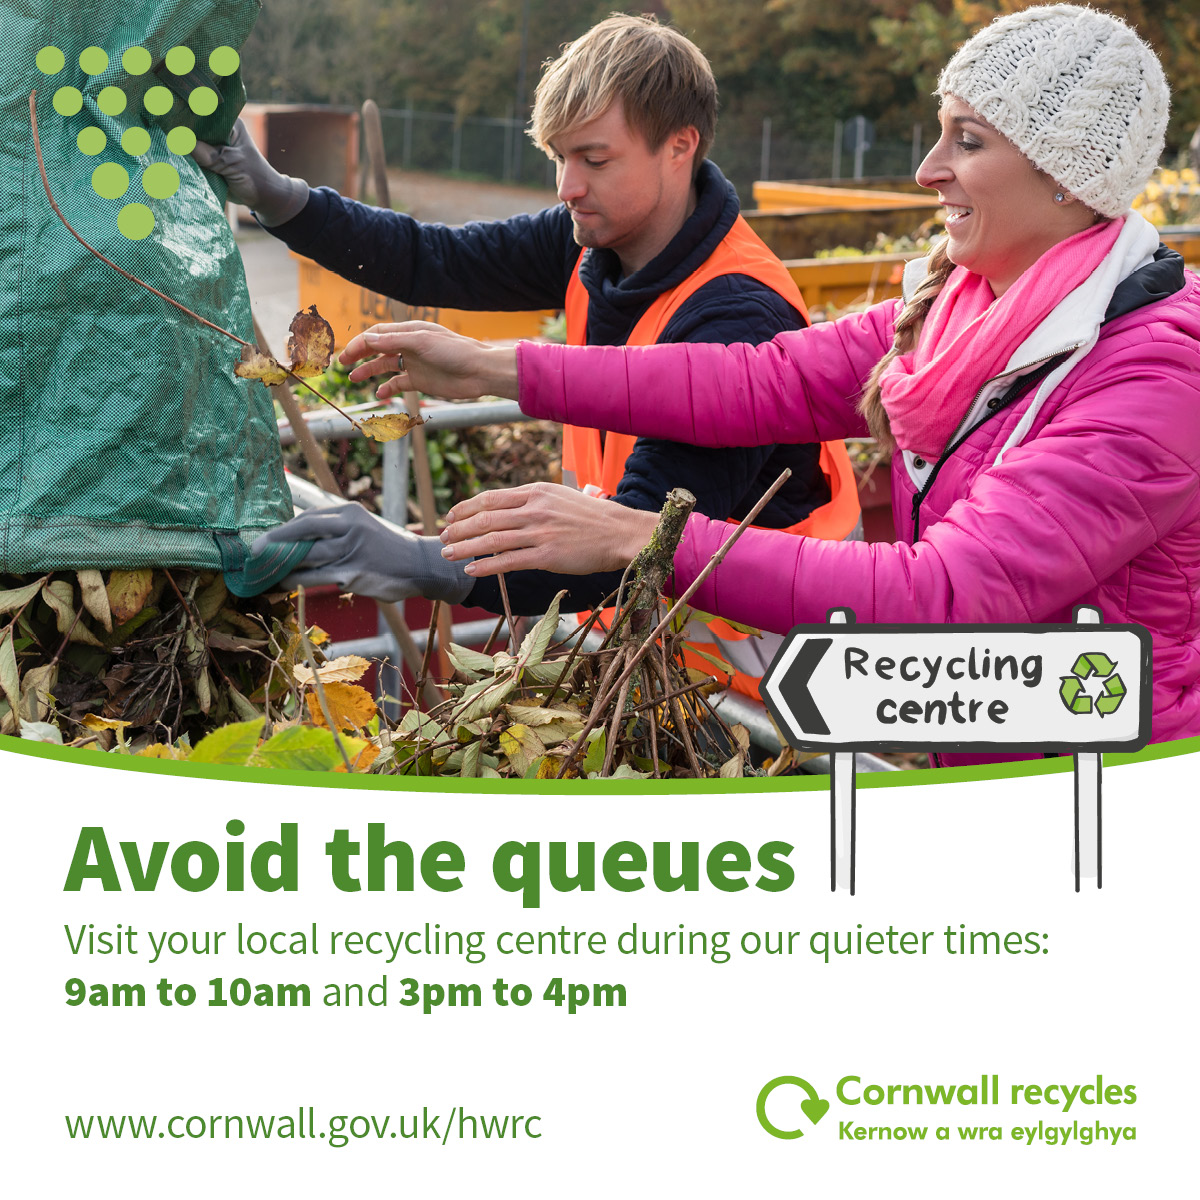 ♻️ Planning on visiting your local household recycling centre? The sites can get busy on bank holiday weekends. To avoid queues, go during quieter times like 9-10am or 3-4pm. Sort your items before you go for faster drop-off. Find your nearest centre ➡️ orlo.uk/Household_Wast…